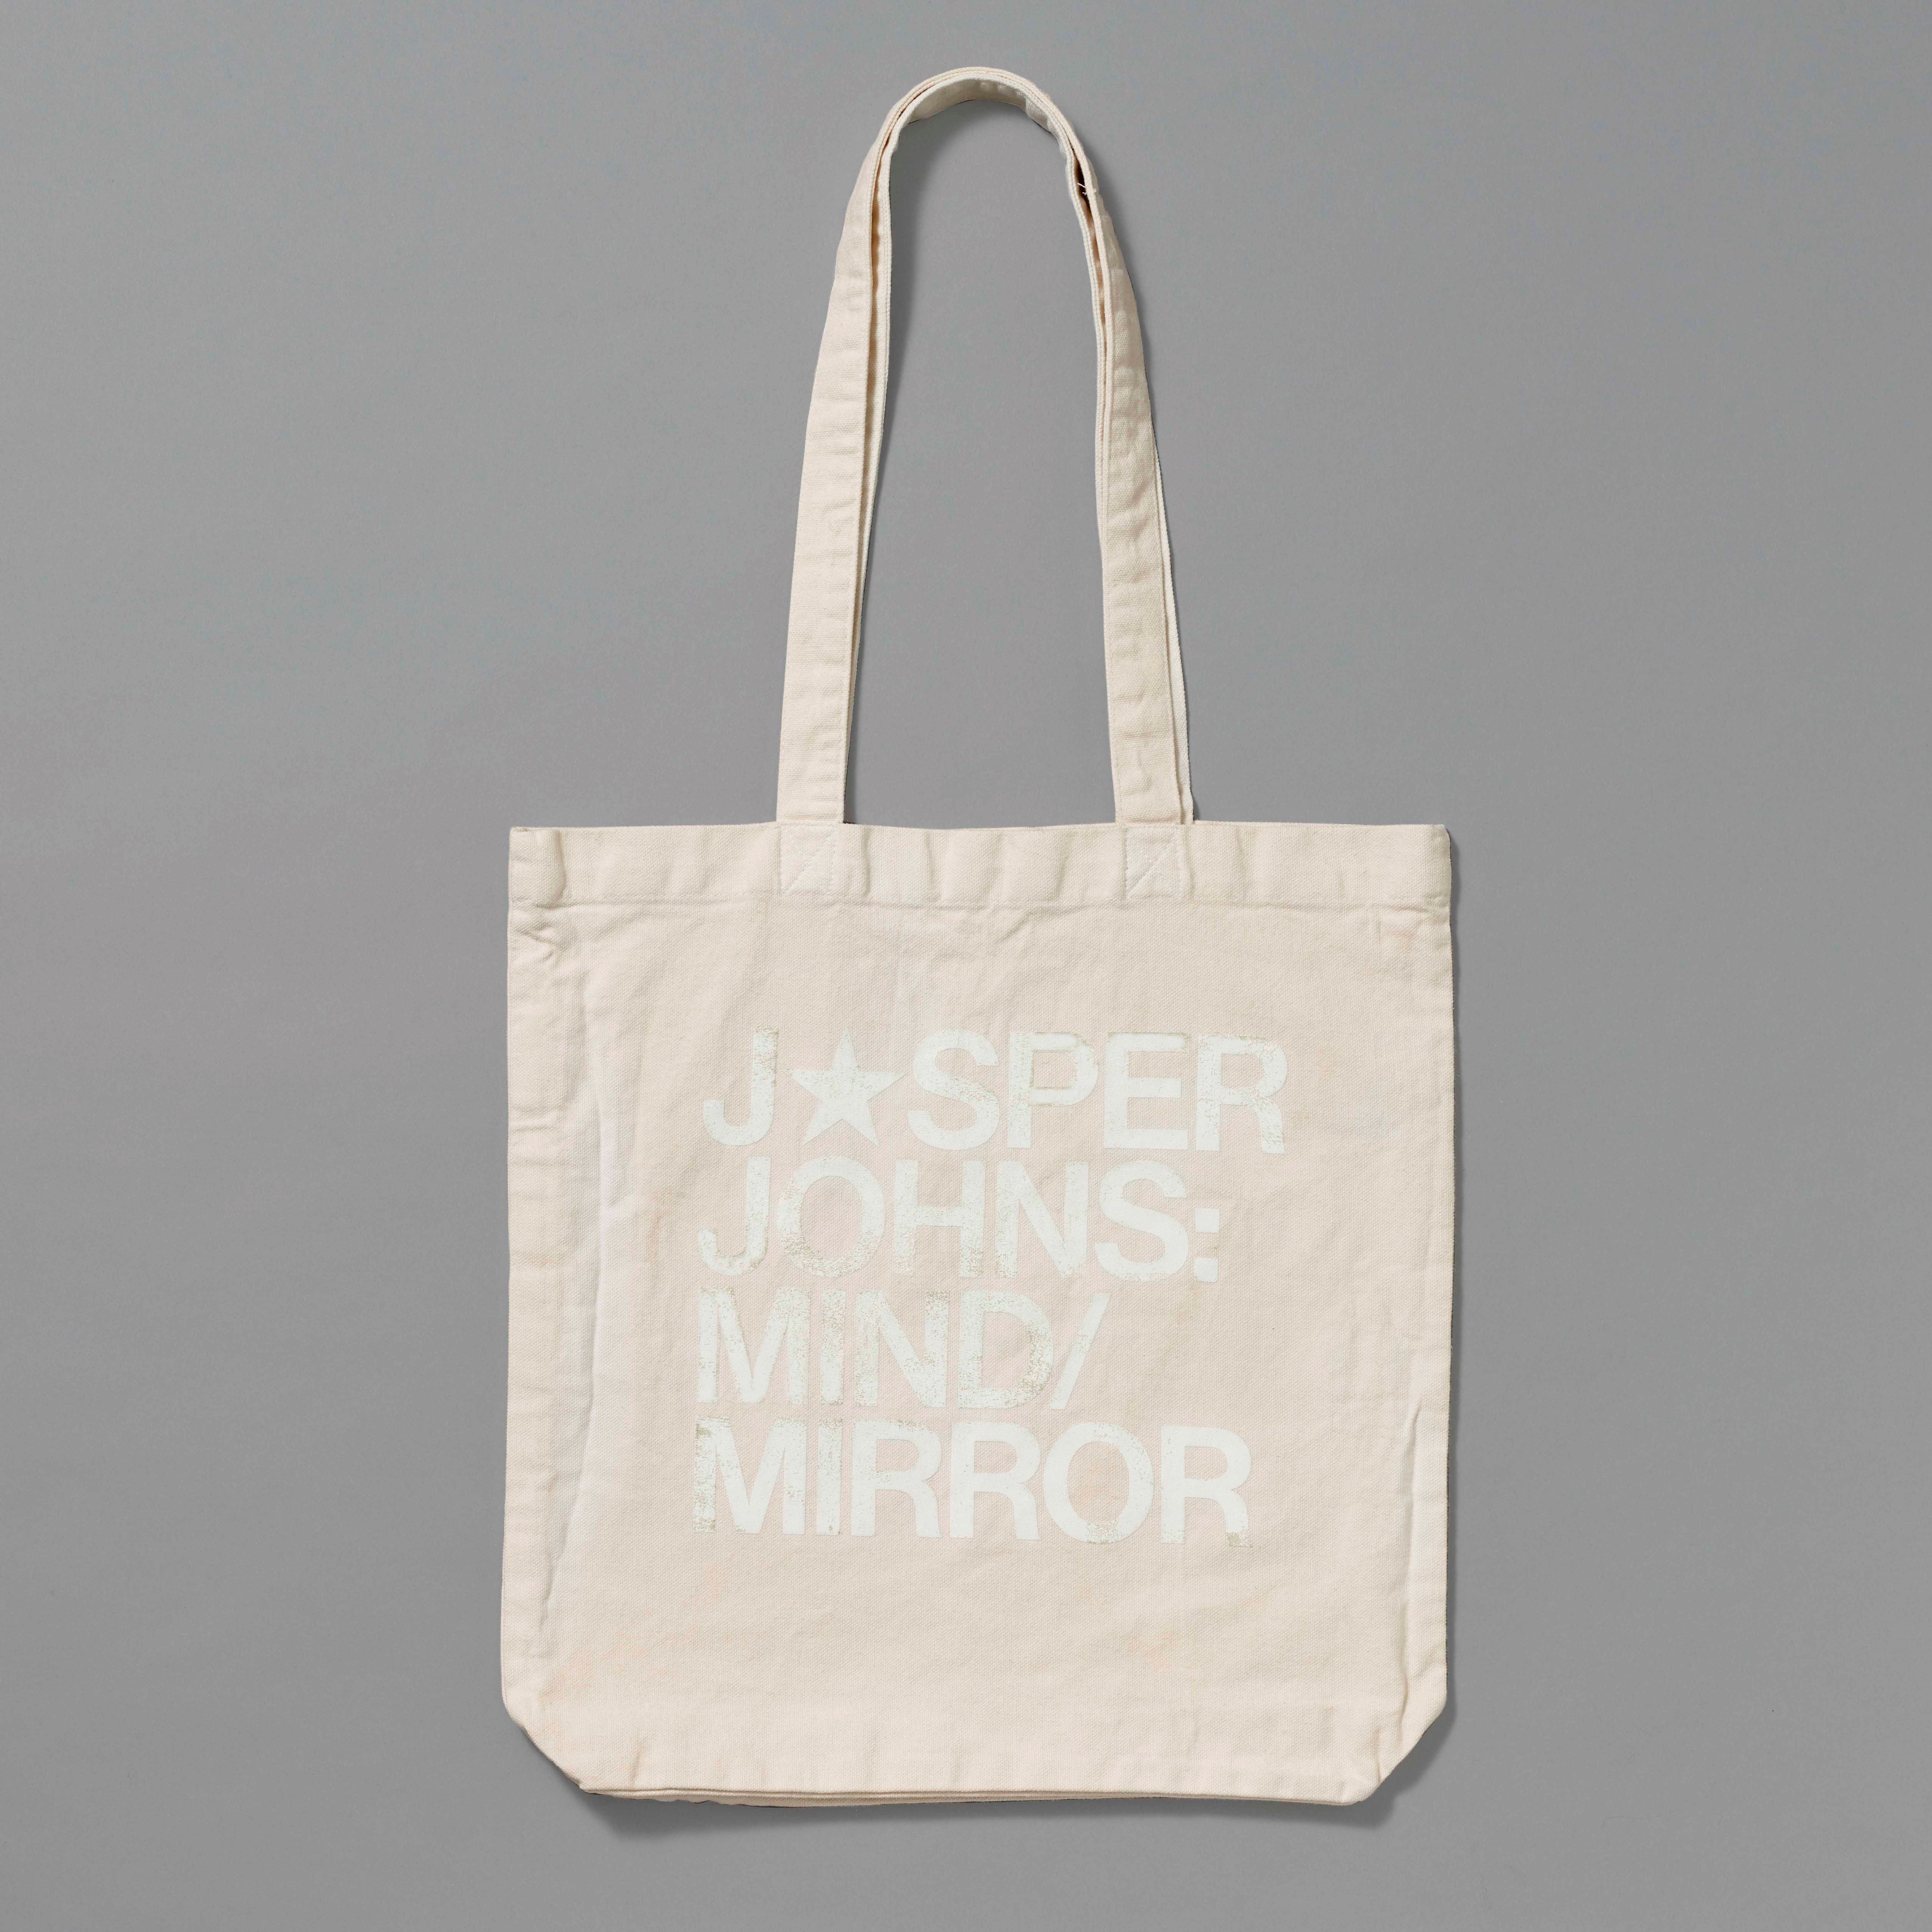 100% Organic Cotton cream tote with Jasper Johns: Mind/Mirror printed in white. Measures 15.5" x 13". 11.5" handles